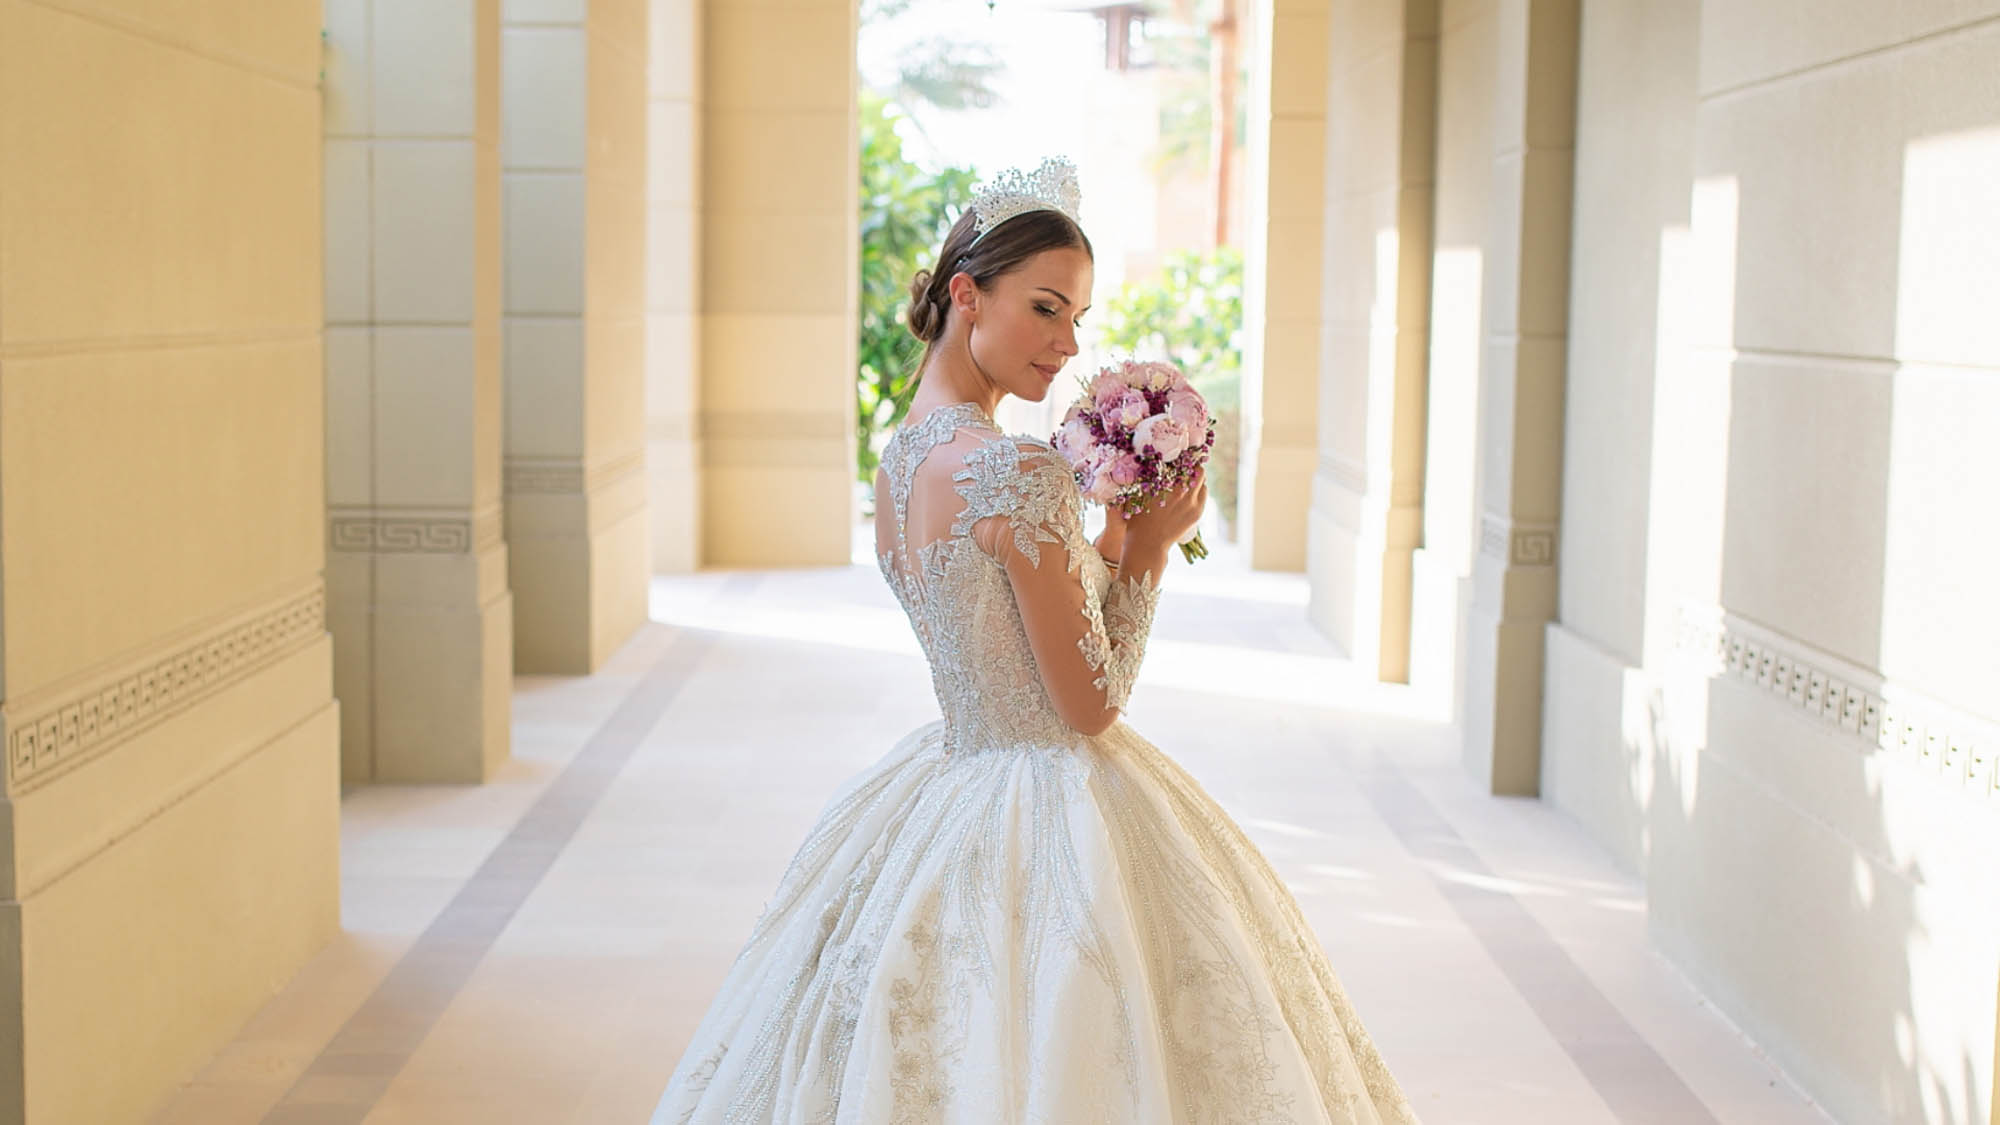 3 Steps to Start a Bridal Store Perfectly